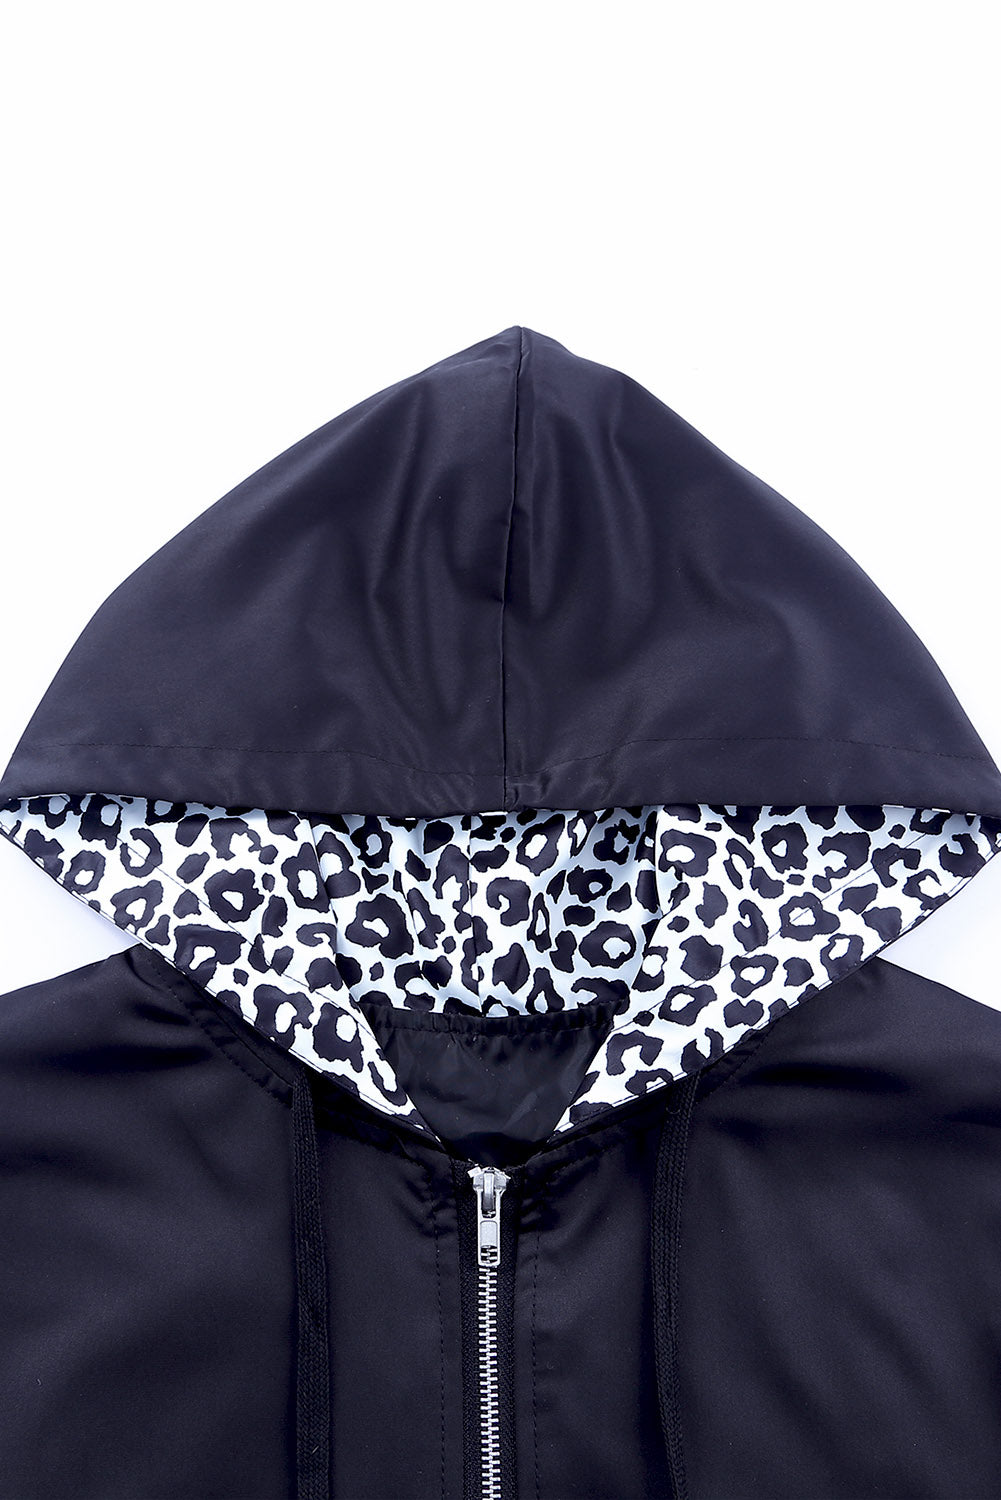 Leopard Color Block Zip-Up Hooded Jacket The Stout Steer